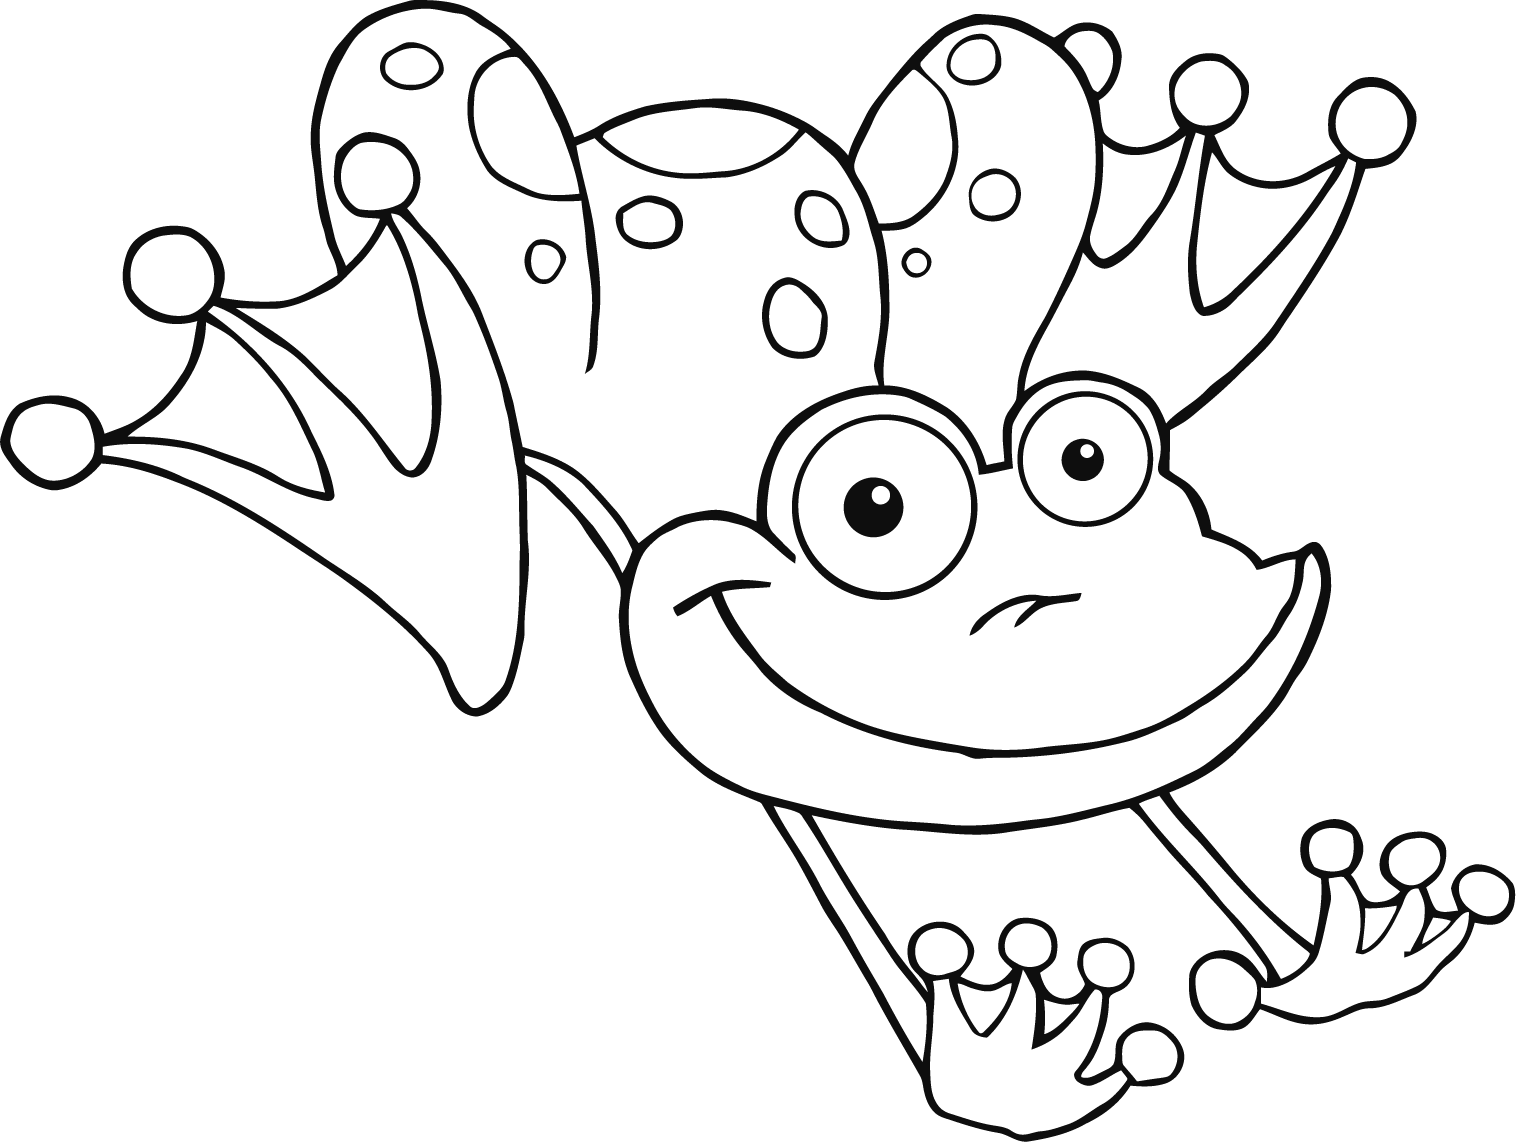 Jumping Toad Coloring Page